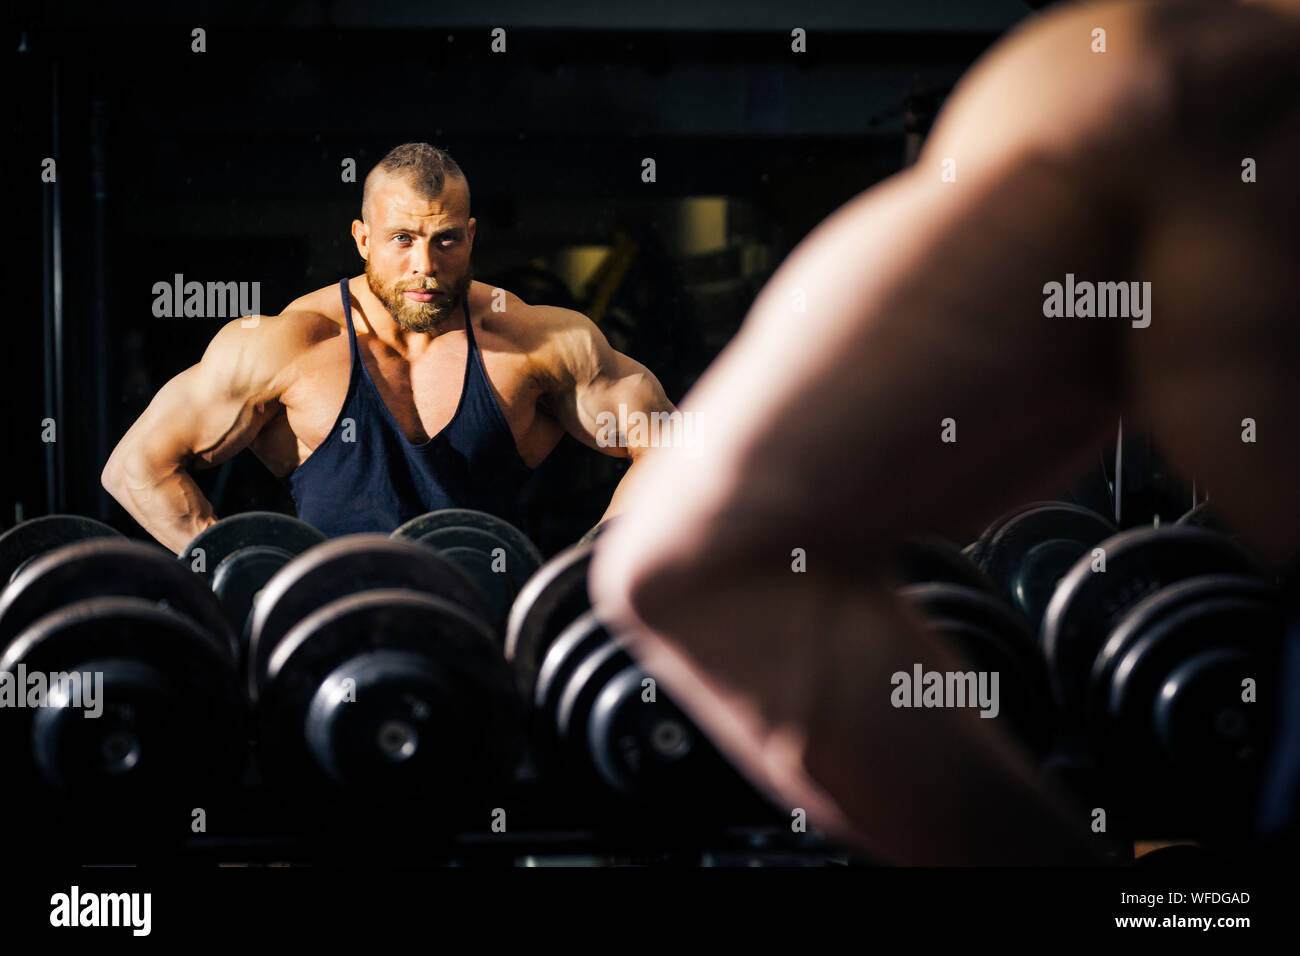 Close Up Of Muscular Man Holding Dumbbell At Gym Stock Photo Images, Photos, Reviews